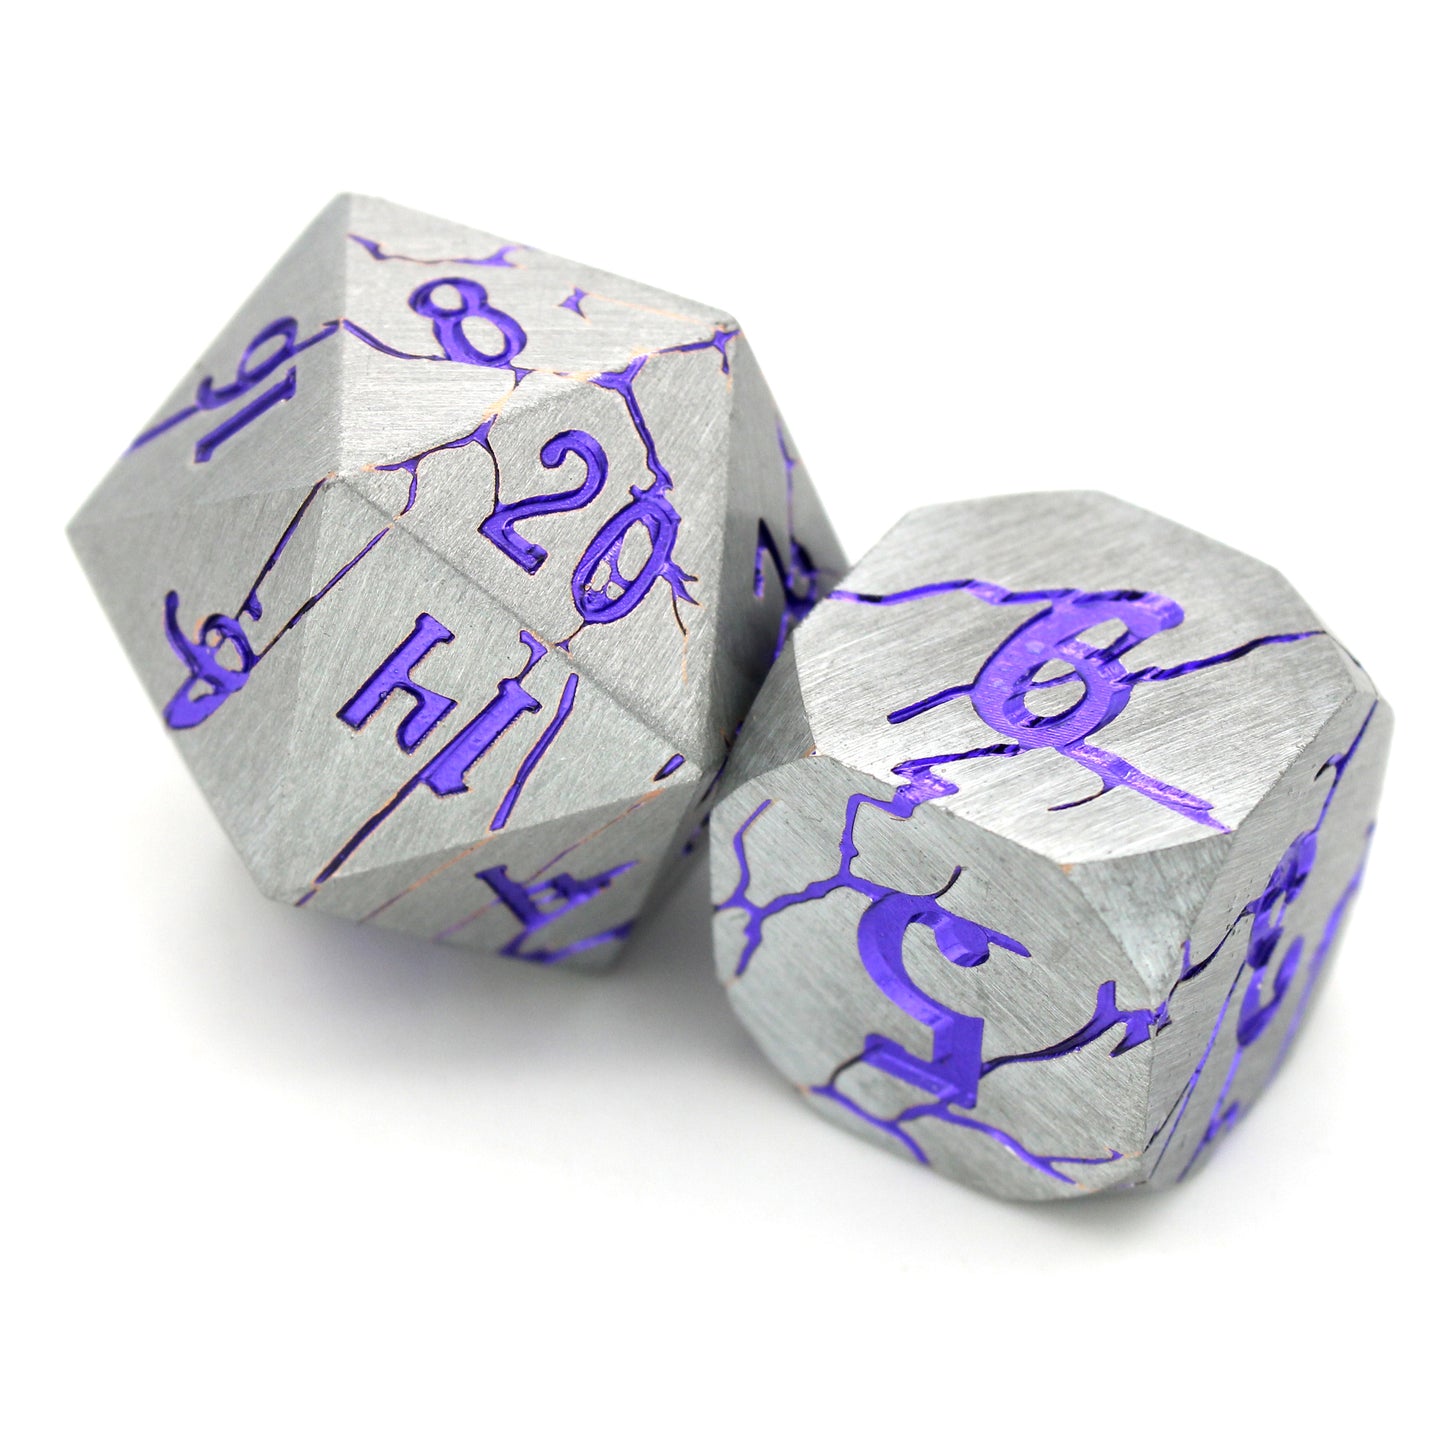 Dis Delights is a 7-piece set of silver dice, with lines and numbers of gleaming metallic purple.